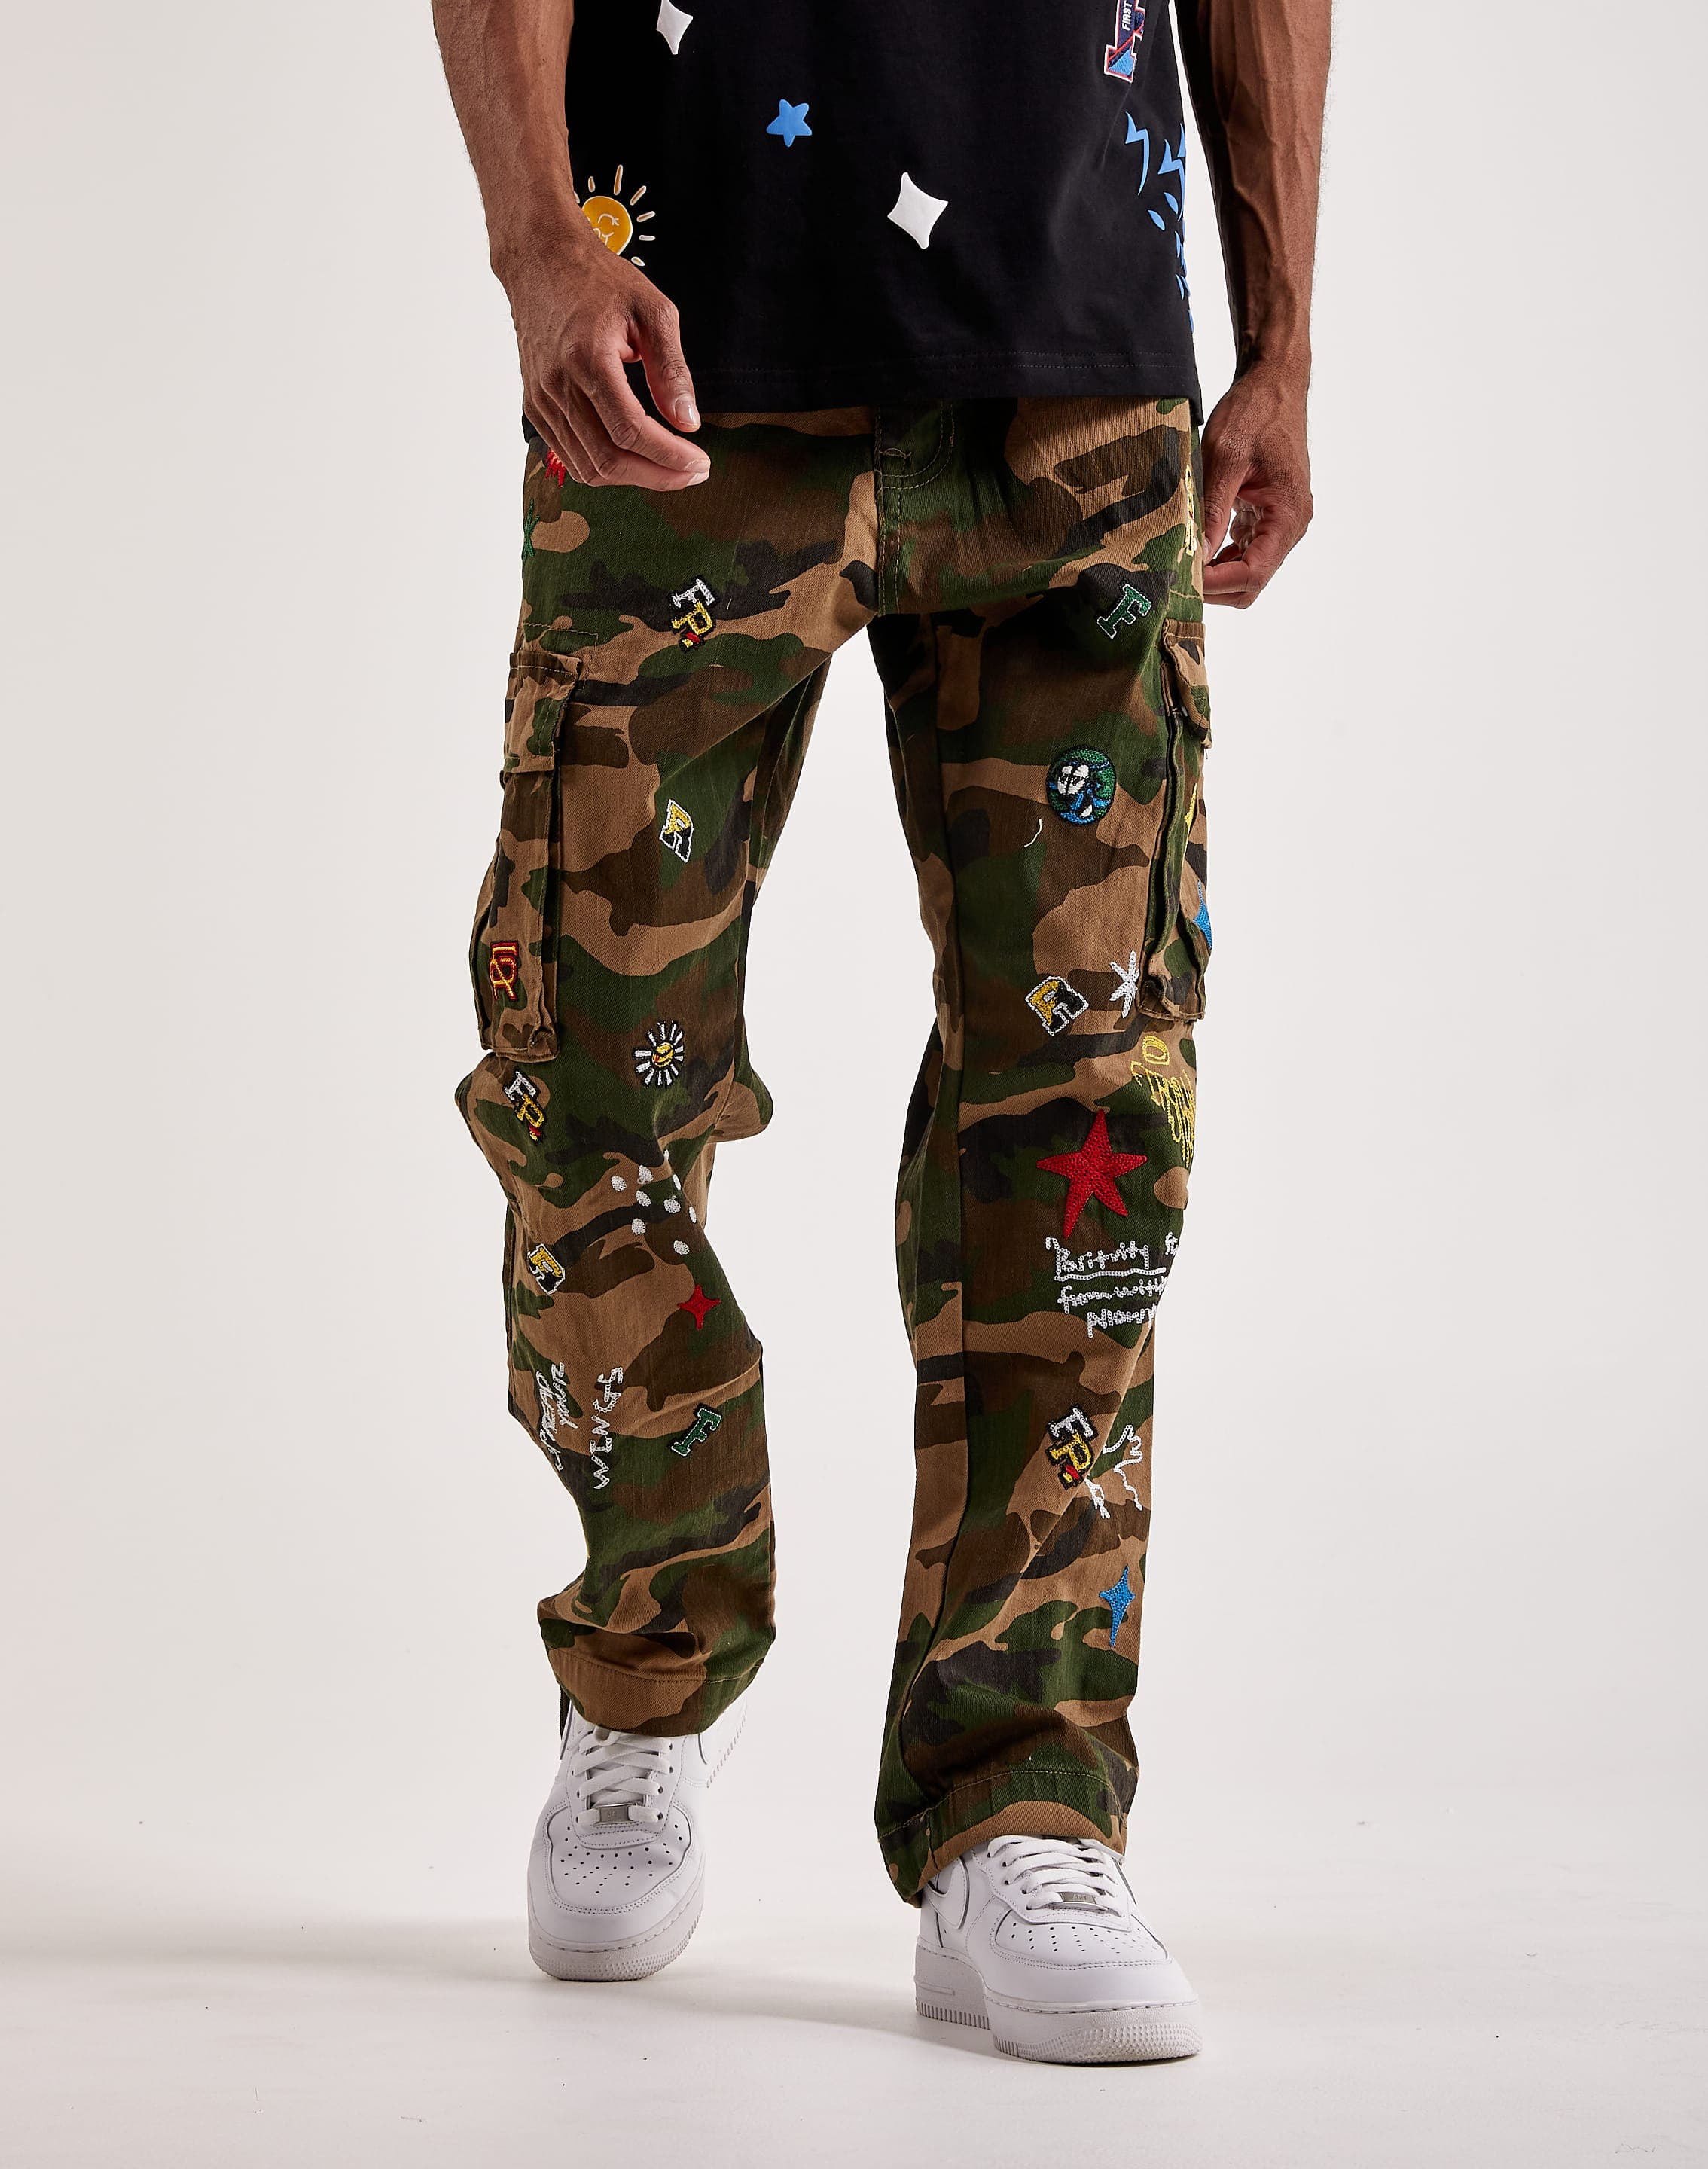 Buy Olive Trousers & Pants for Men by Celio Online | Ajio.com